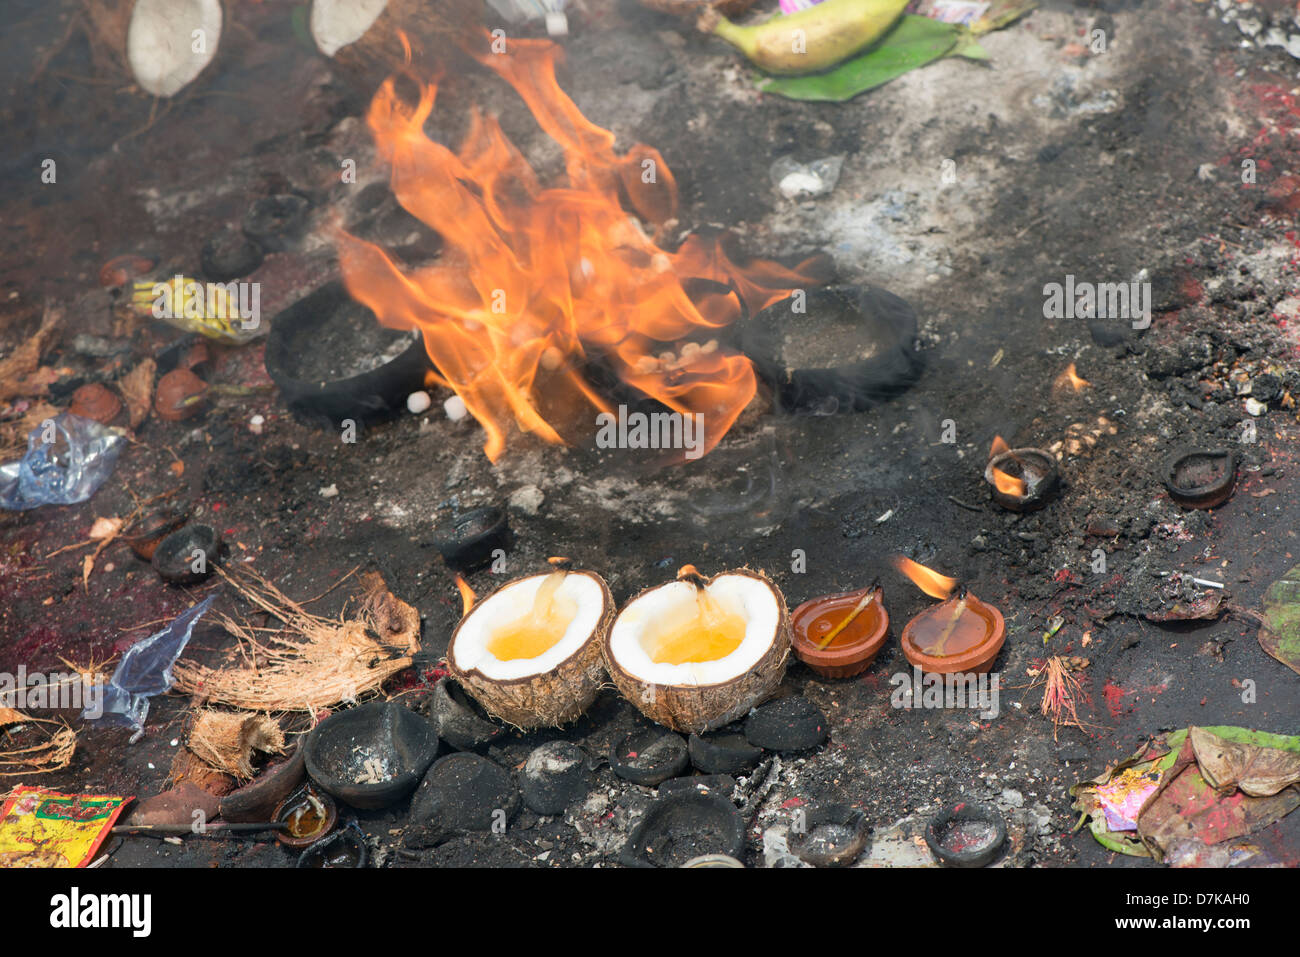 Offerings of coconut and ghee lamps are placed on the ground at the Arunachaleswara Temple in Tiruvannamalai, Tamil Nadu, India Stock Photo